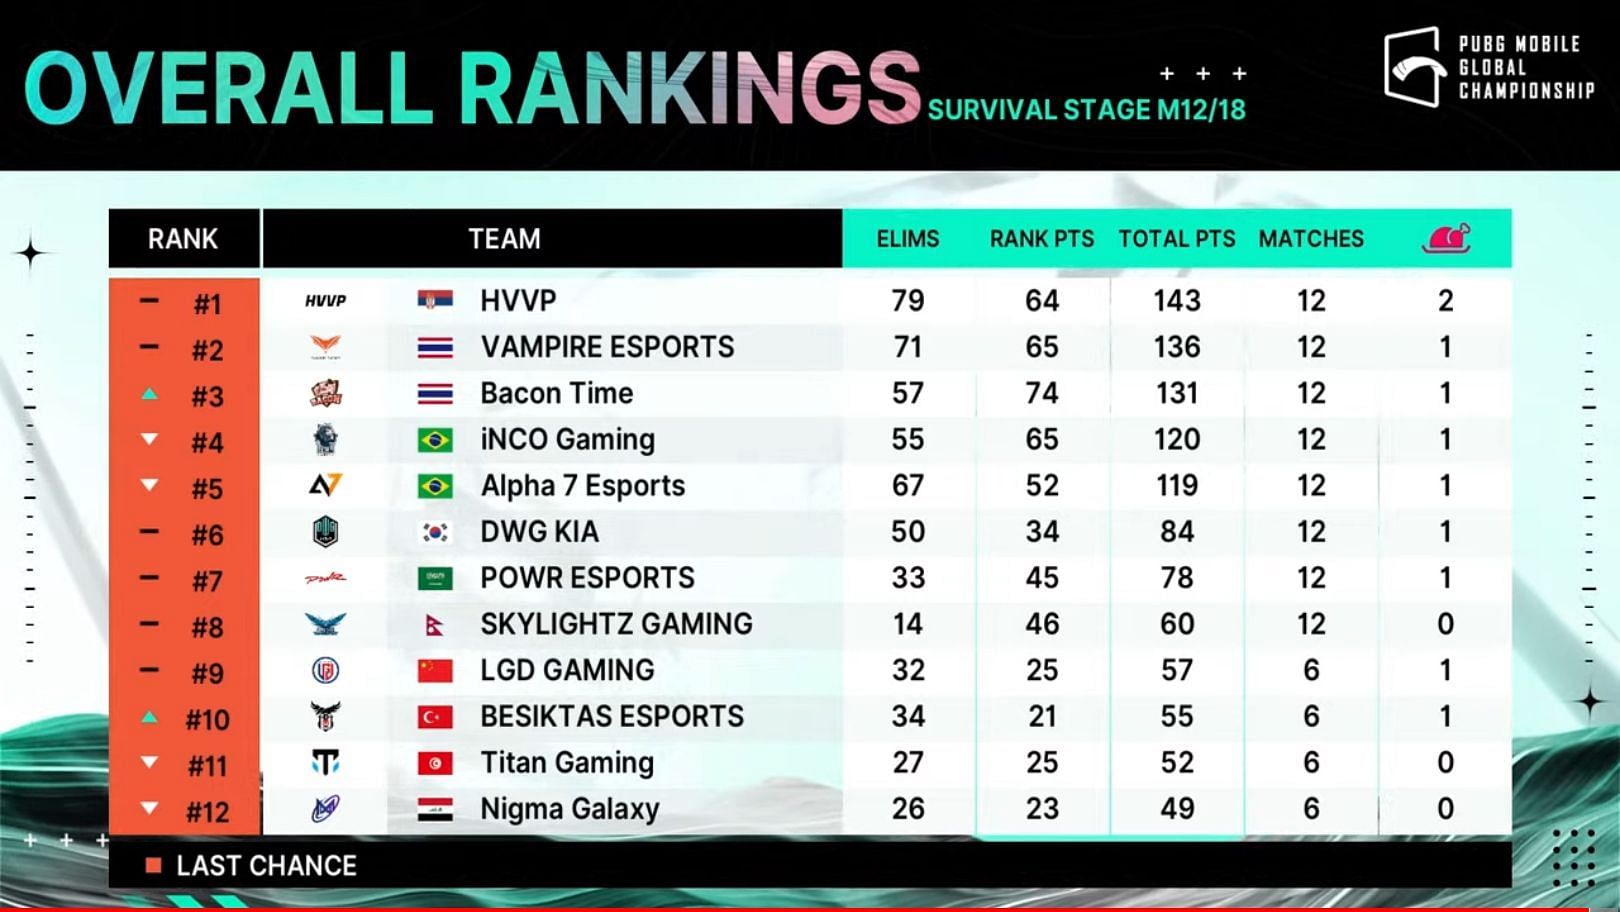 Top 12 teams' rankings after PMGC Survival Stage Day 2 (Image via PUBG Mobile)